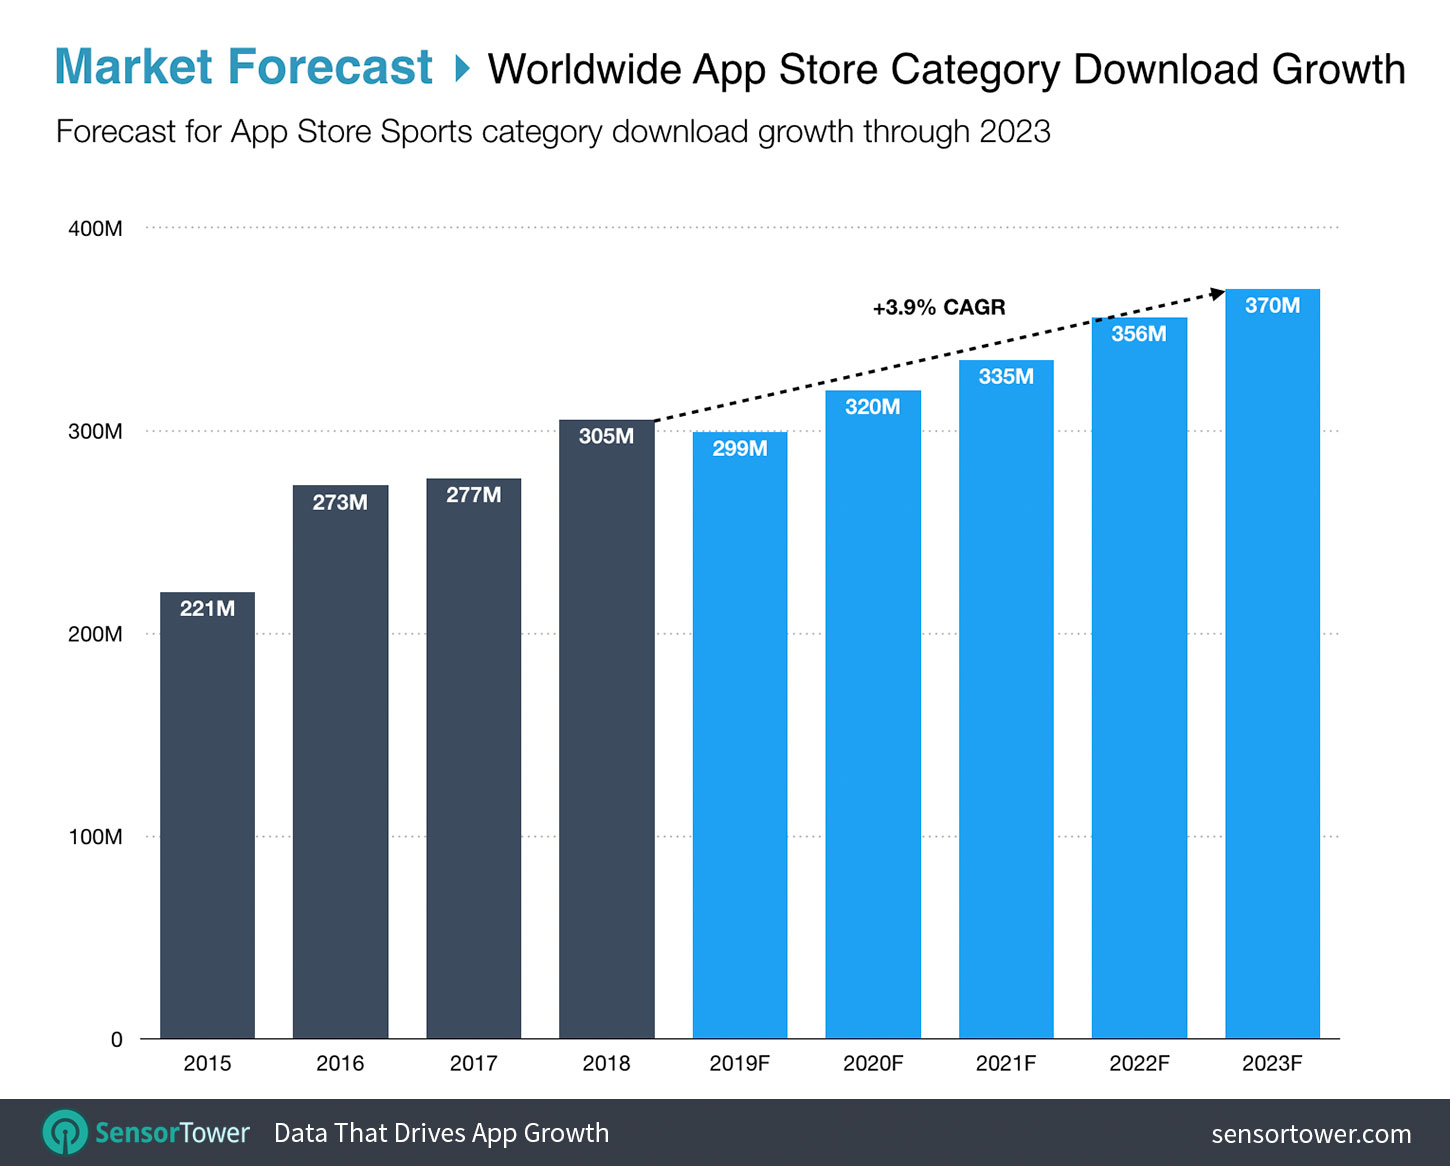 Worldwide Sports Apps Download Growth Forecast Chart for the App Store